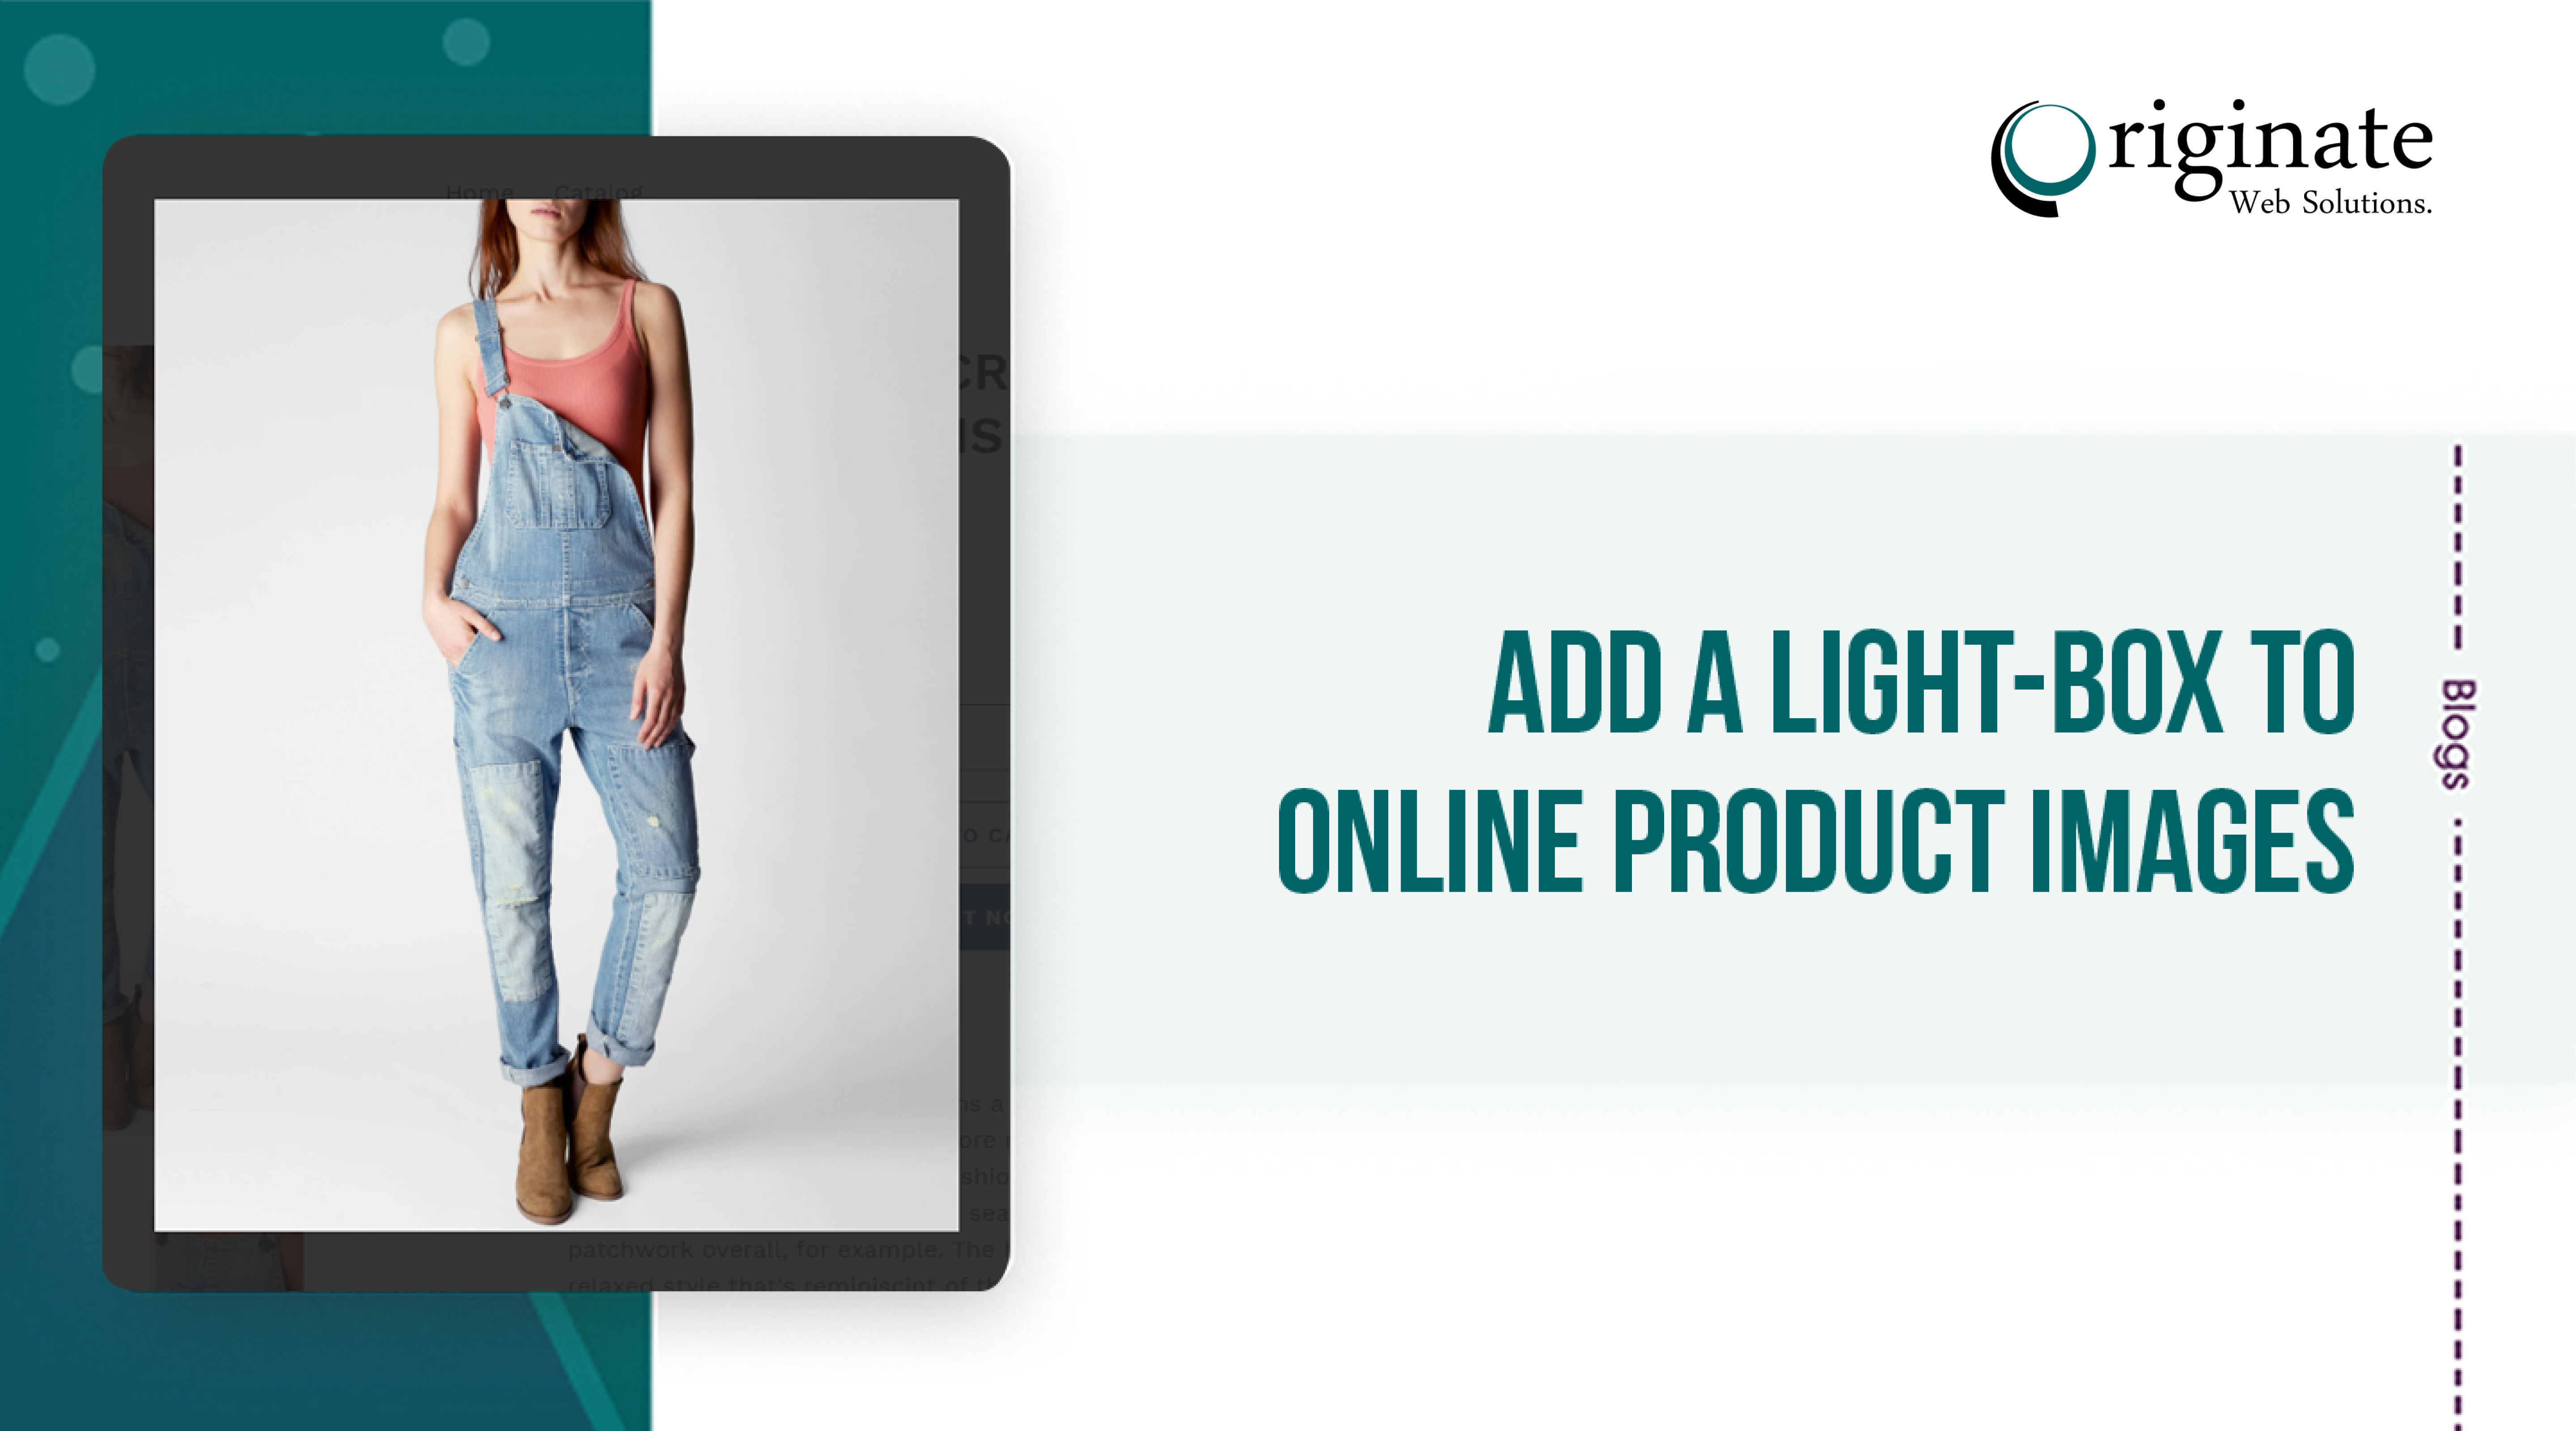 Add a Light-box to online product images